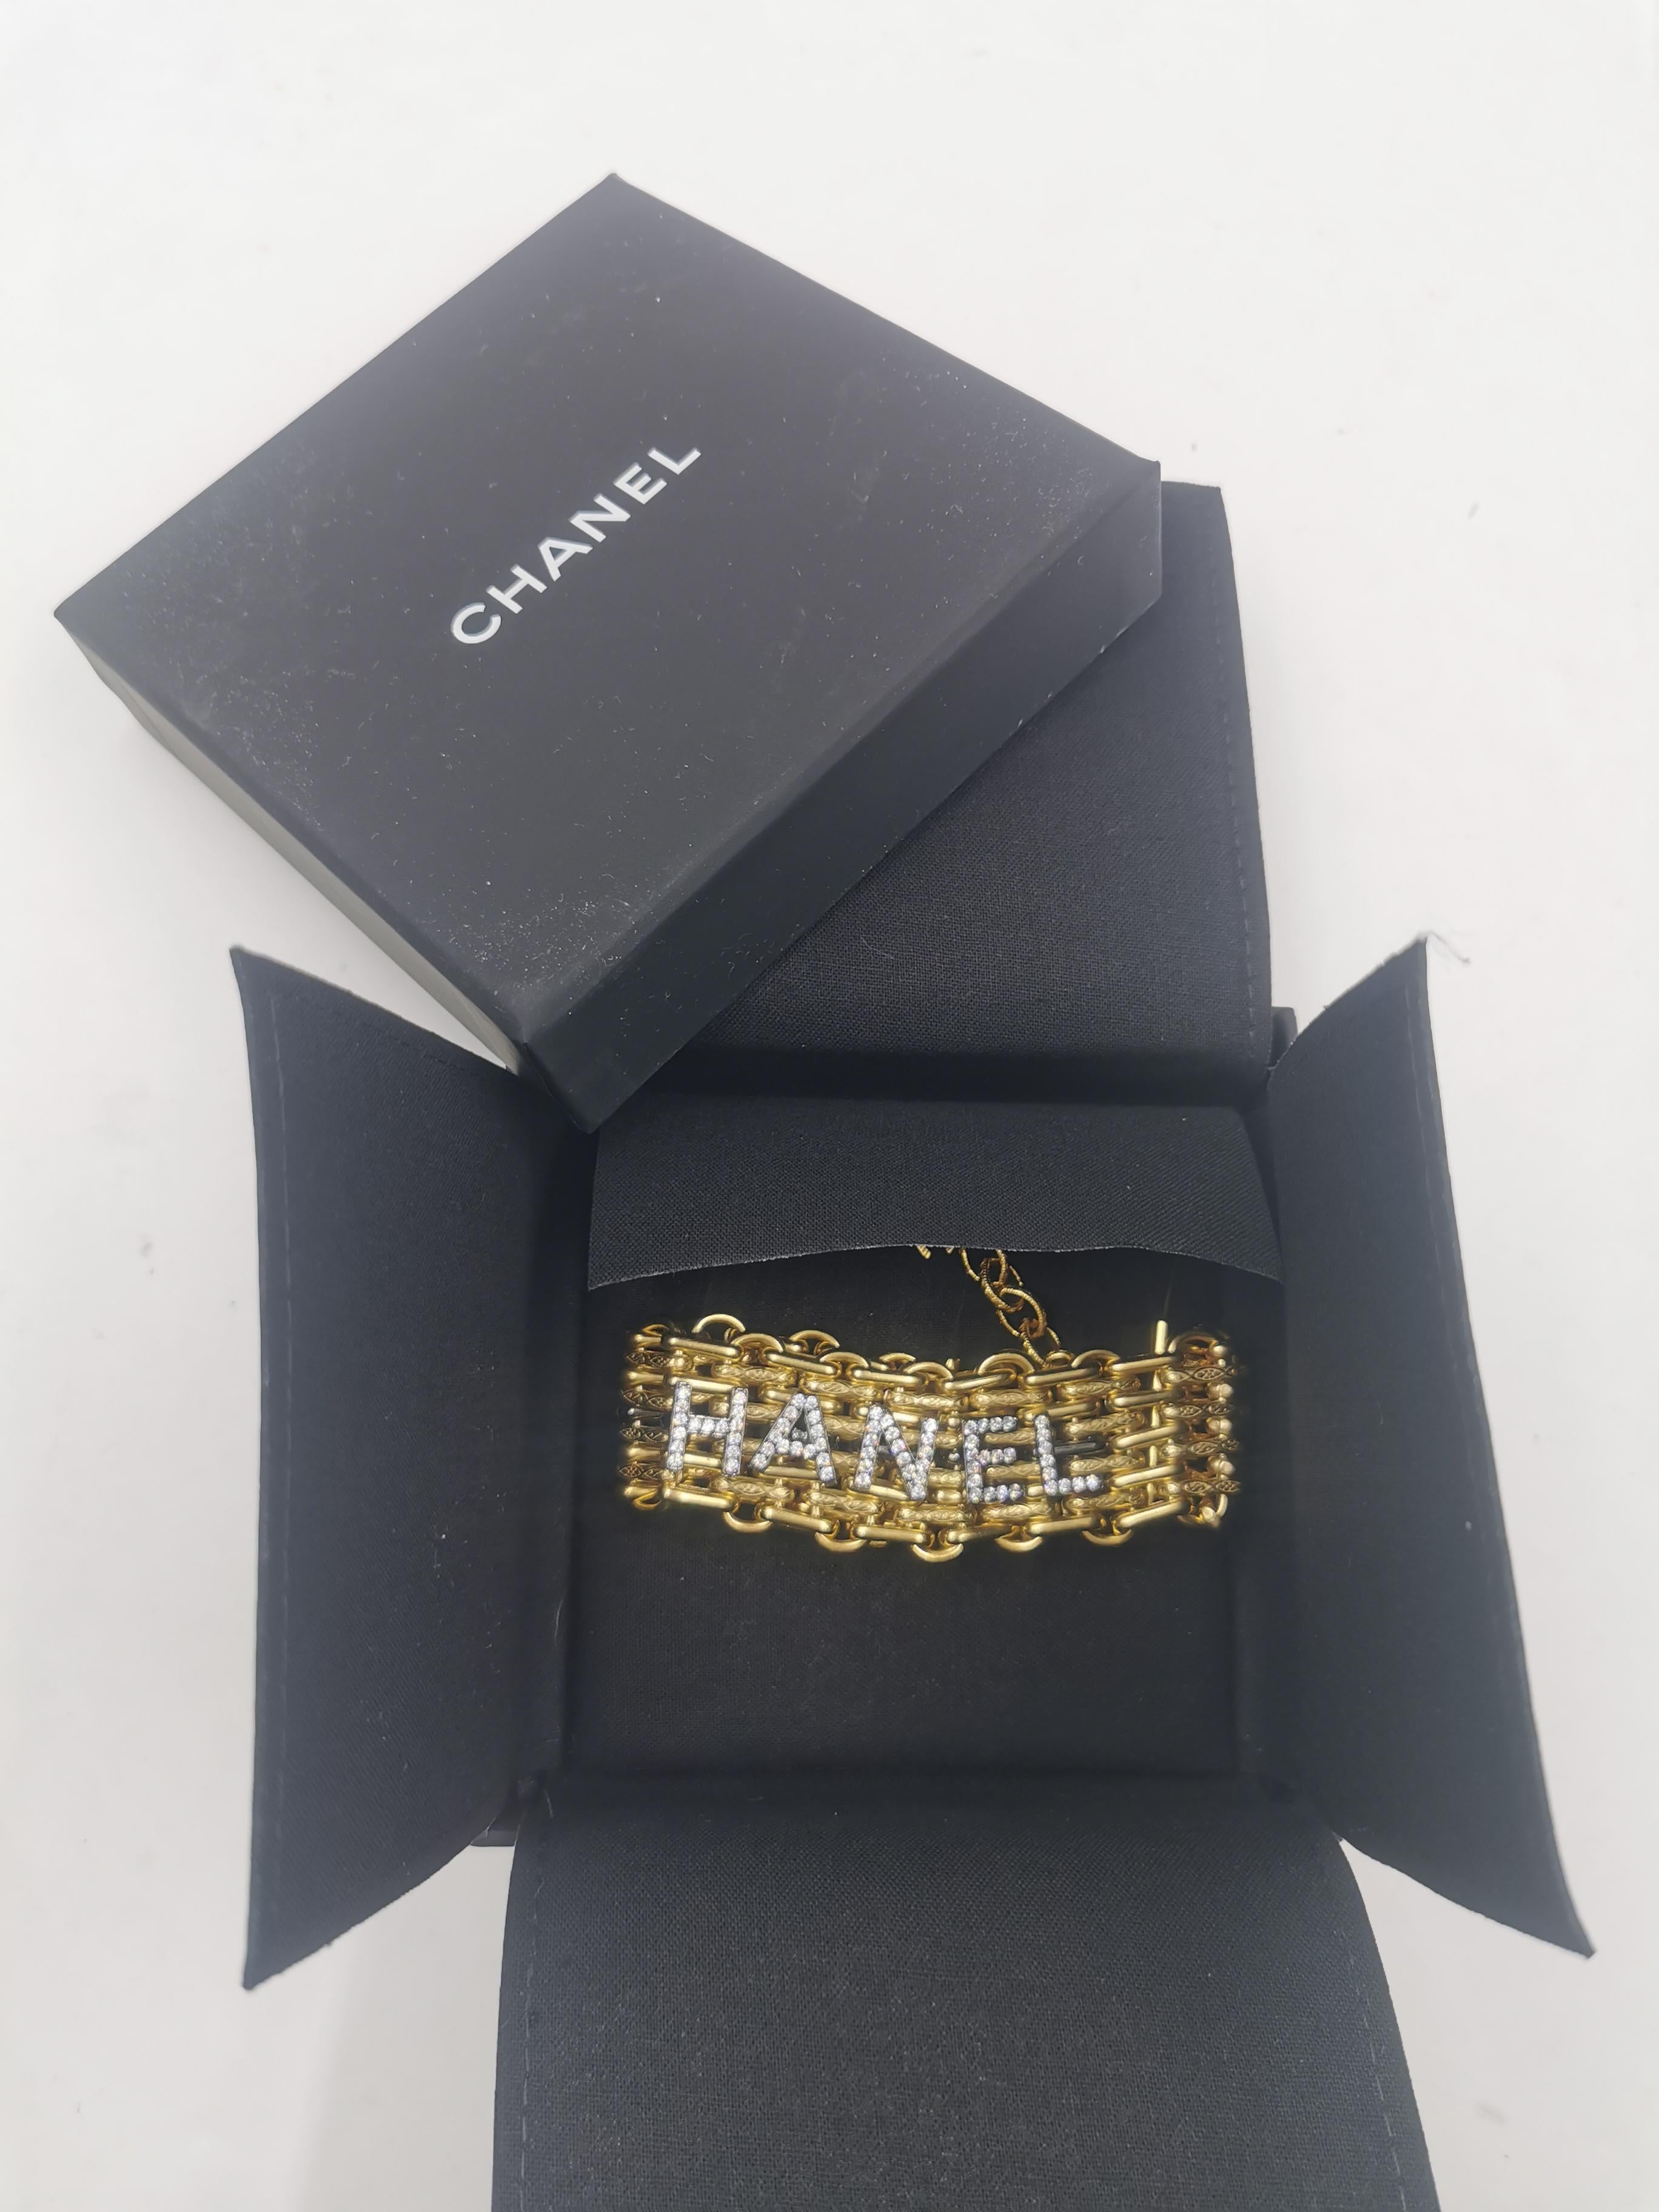 Introducing the exquisite Chanel 20 Runway Alphabet Gold LARGE Massive Rhinestone Chain Bracelet. This stunning piece of jewelry is a true embodiment of luxury and style, showcasing Chanel's unparalleled craftsmanship and attention to